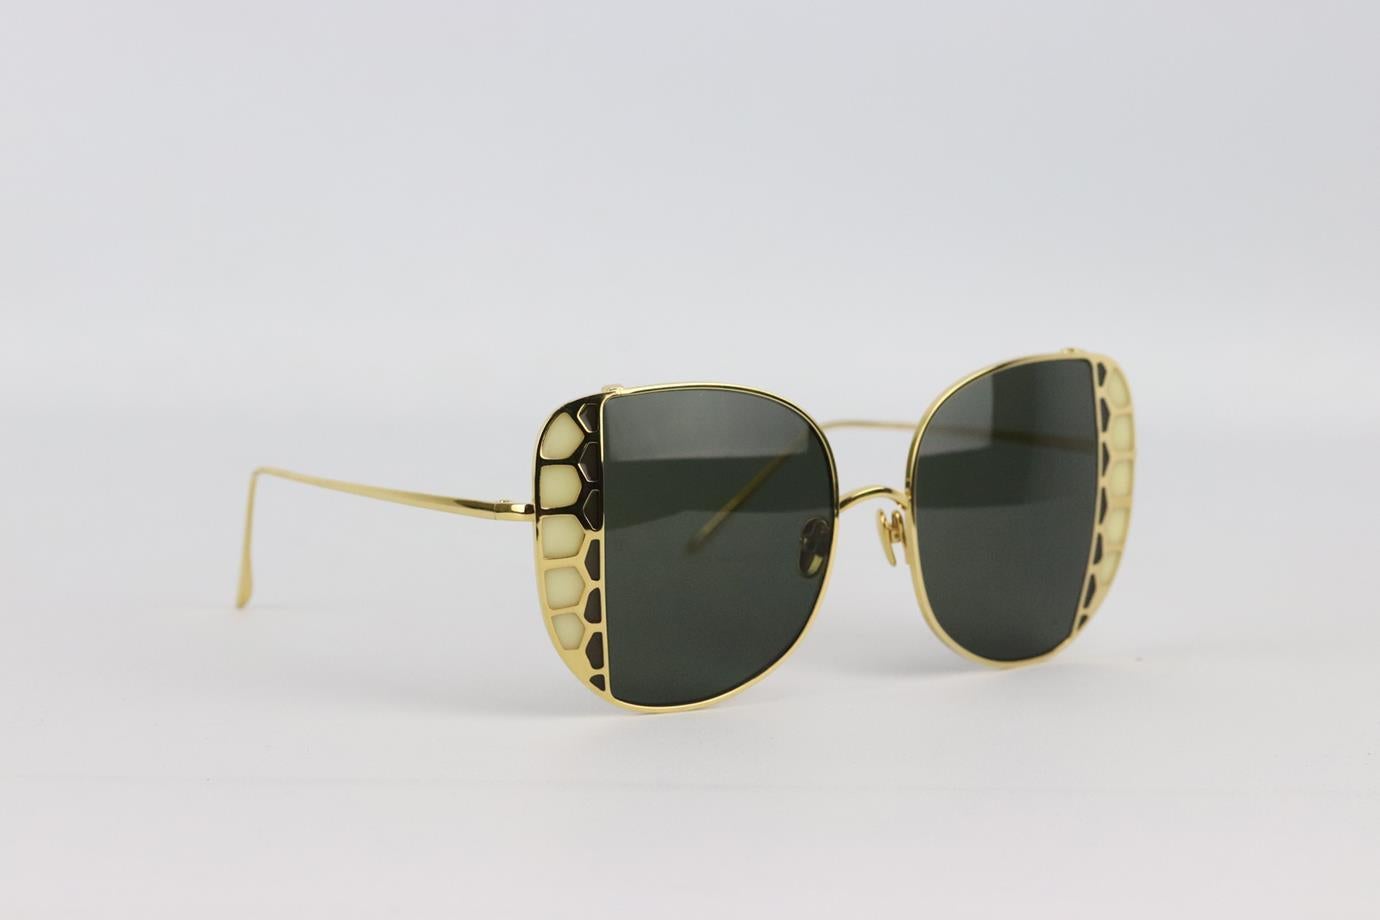 Linda Farrow oversized cat eye 18k gold sunglasses. Gold. Comes with case. Style Code: Amelia. Lens Size: 50 mm. Arm Size: 140 mm. Bridge Size: 16 mm. Very good condition - No sign of wear; see pictures.